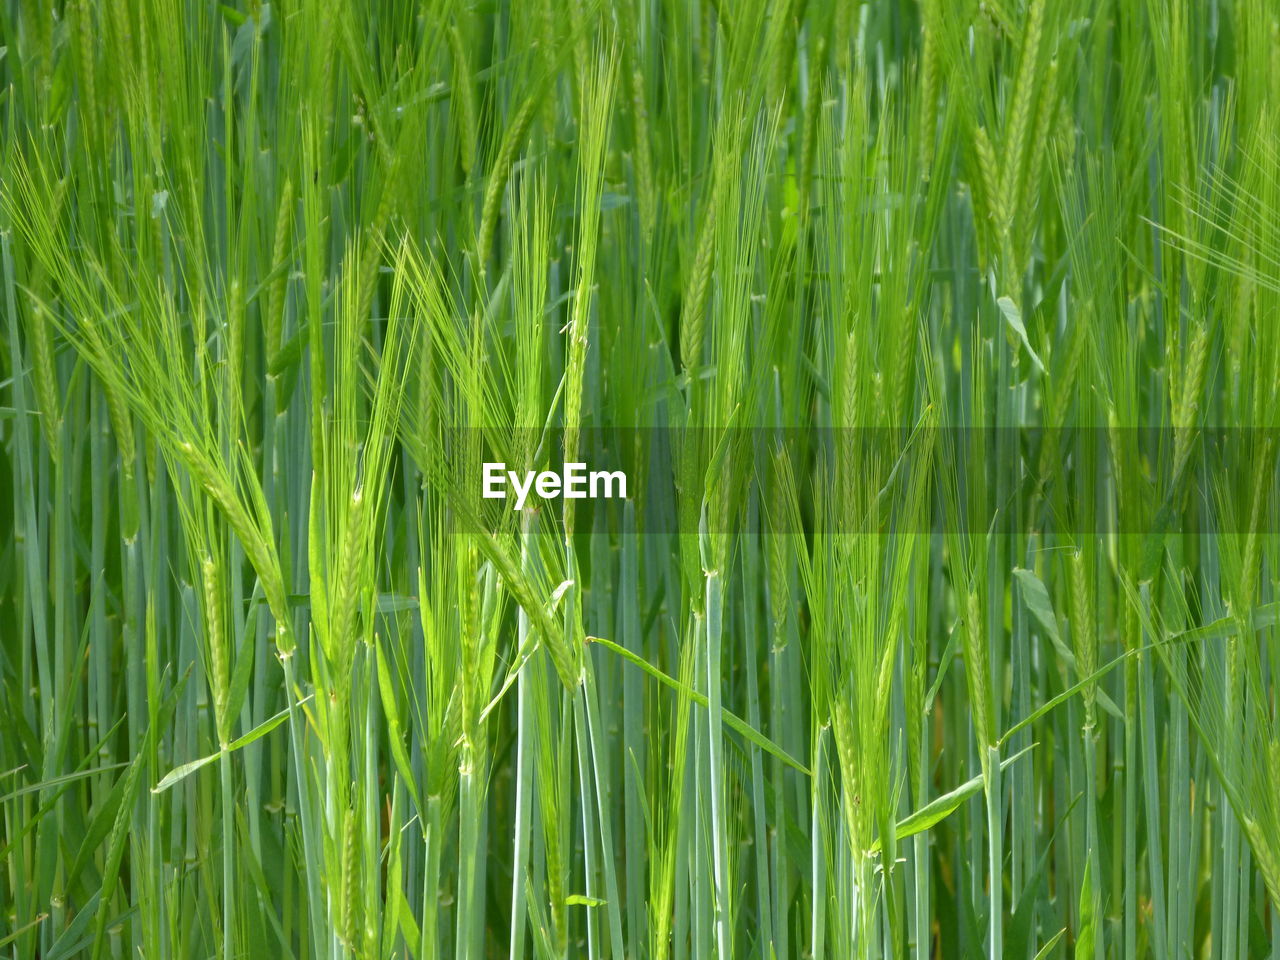 CLOSE-UP OF CROPS GROWING ON FIELD